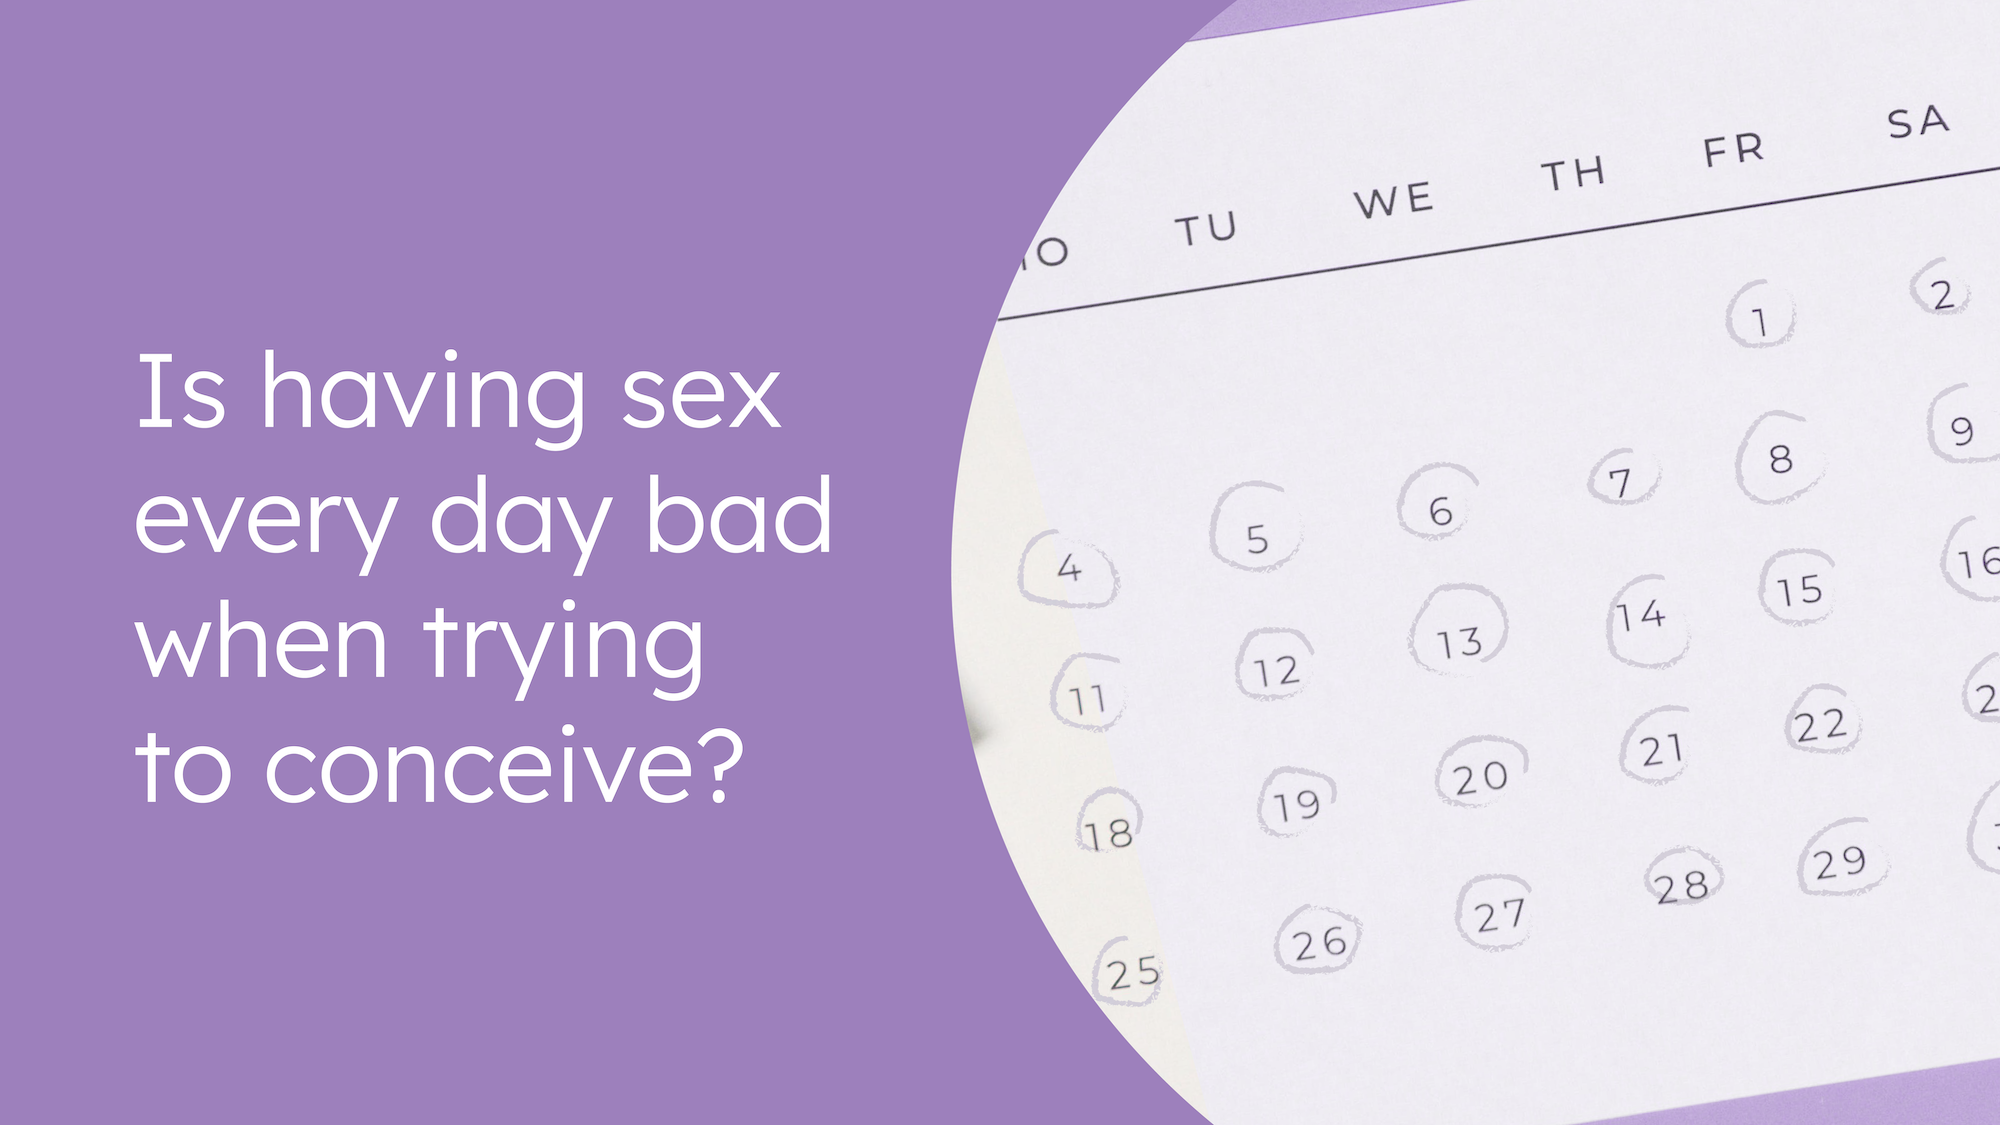 is having sex every day bad when trying to conceive?